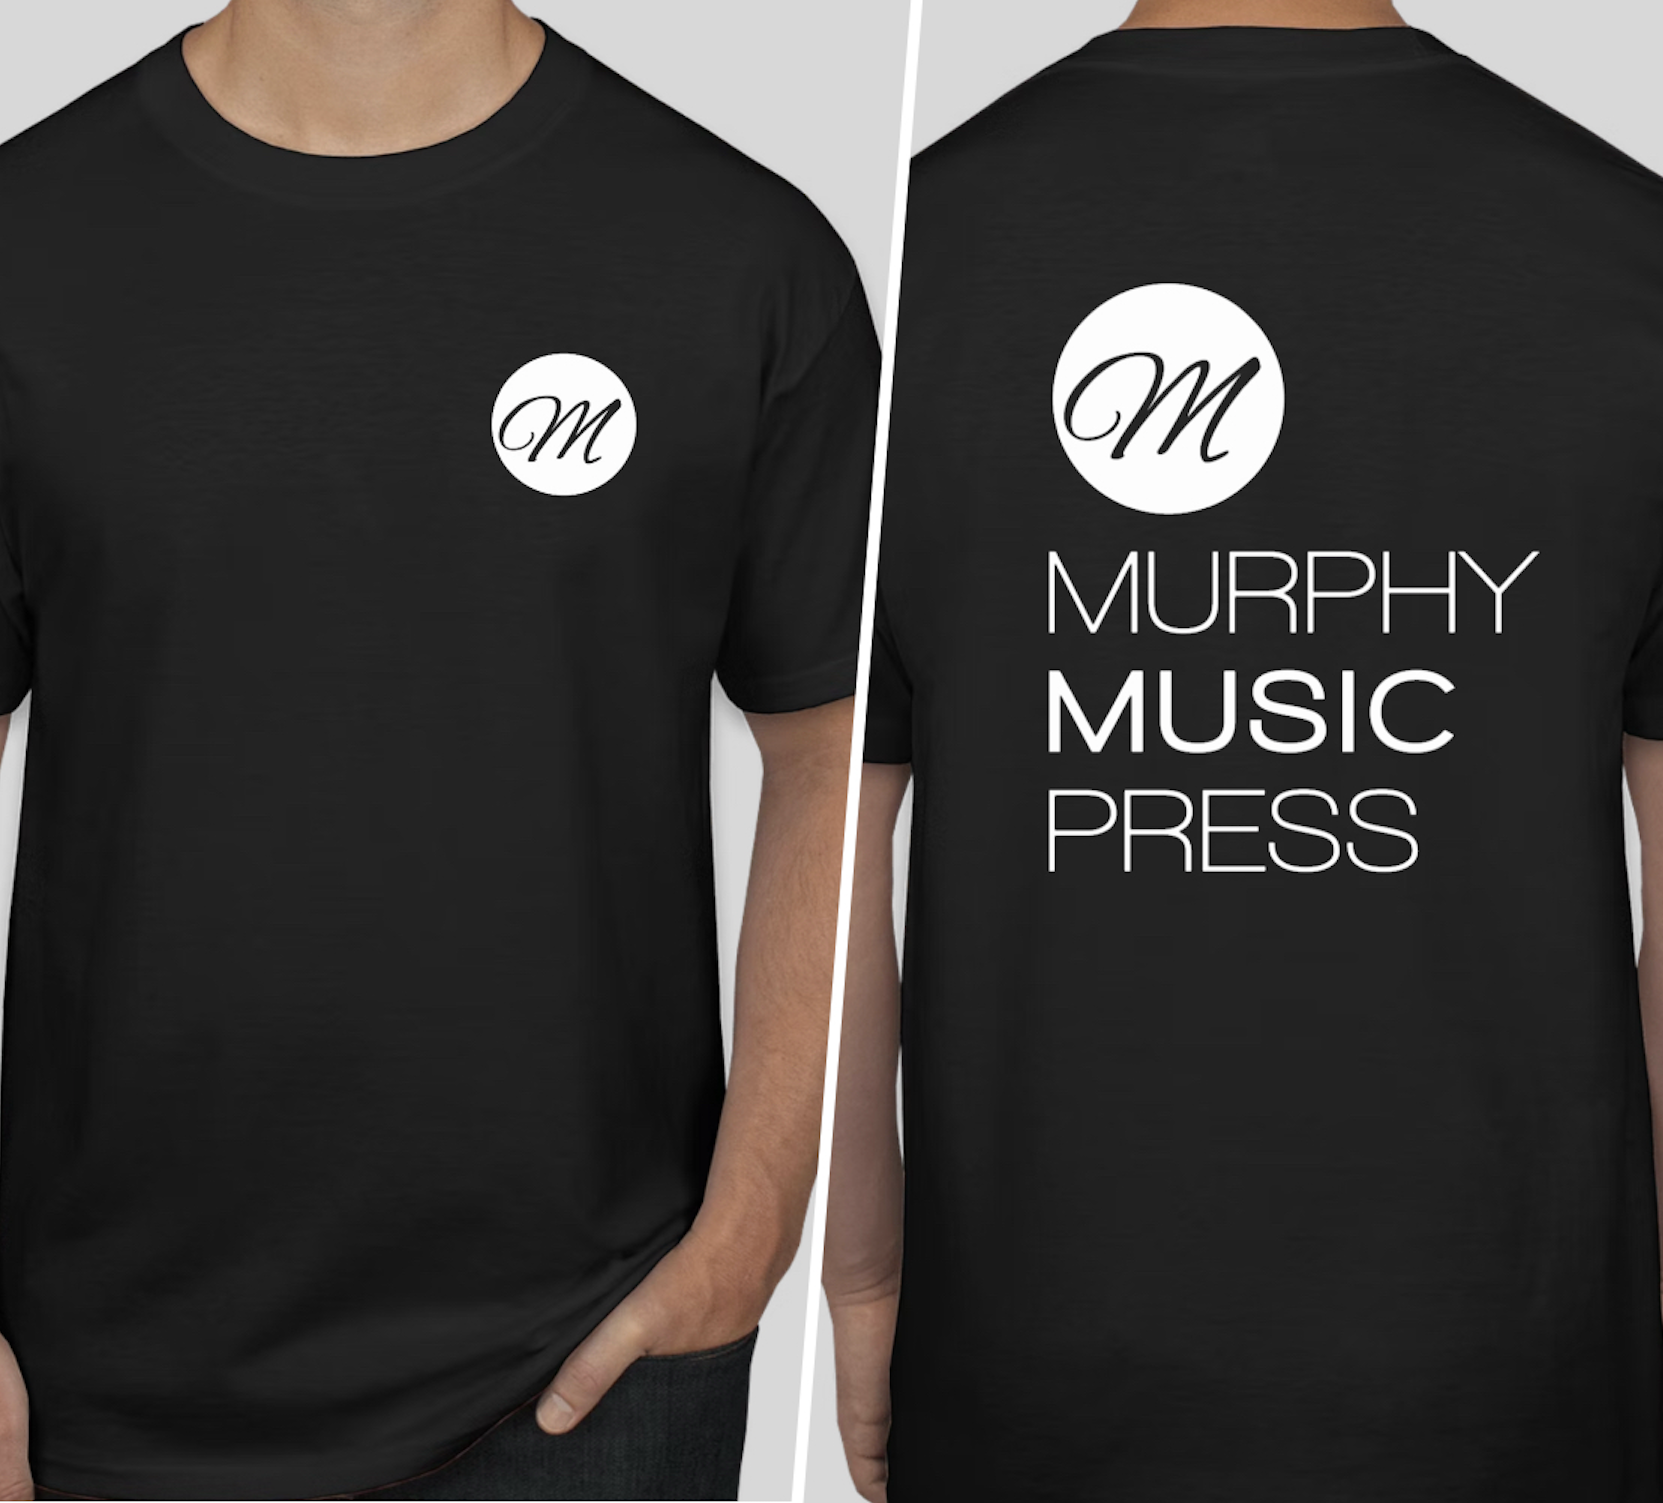 Tee Shirt-Size Extra Large by MMP